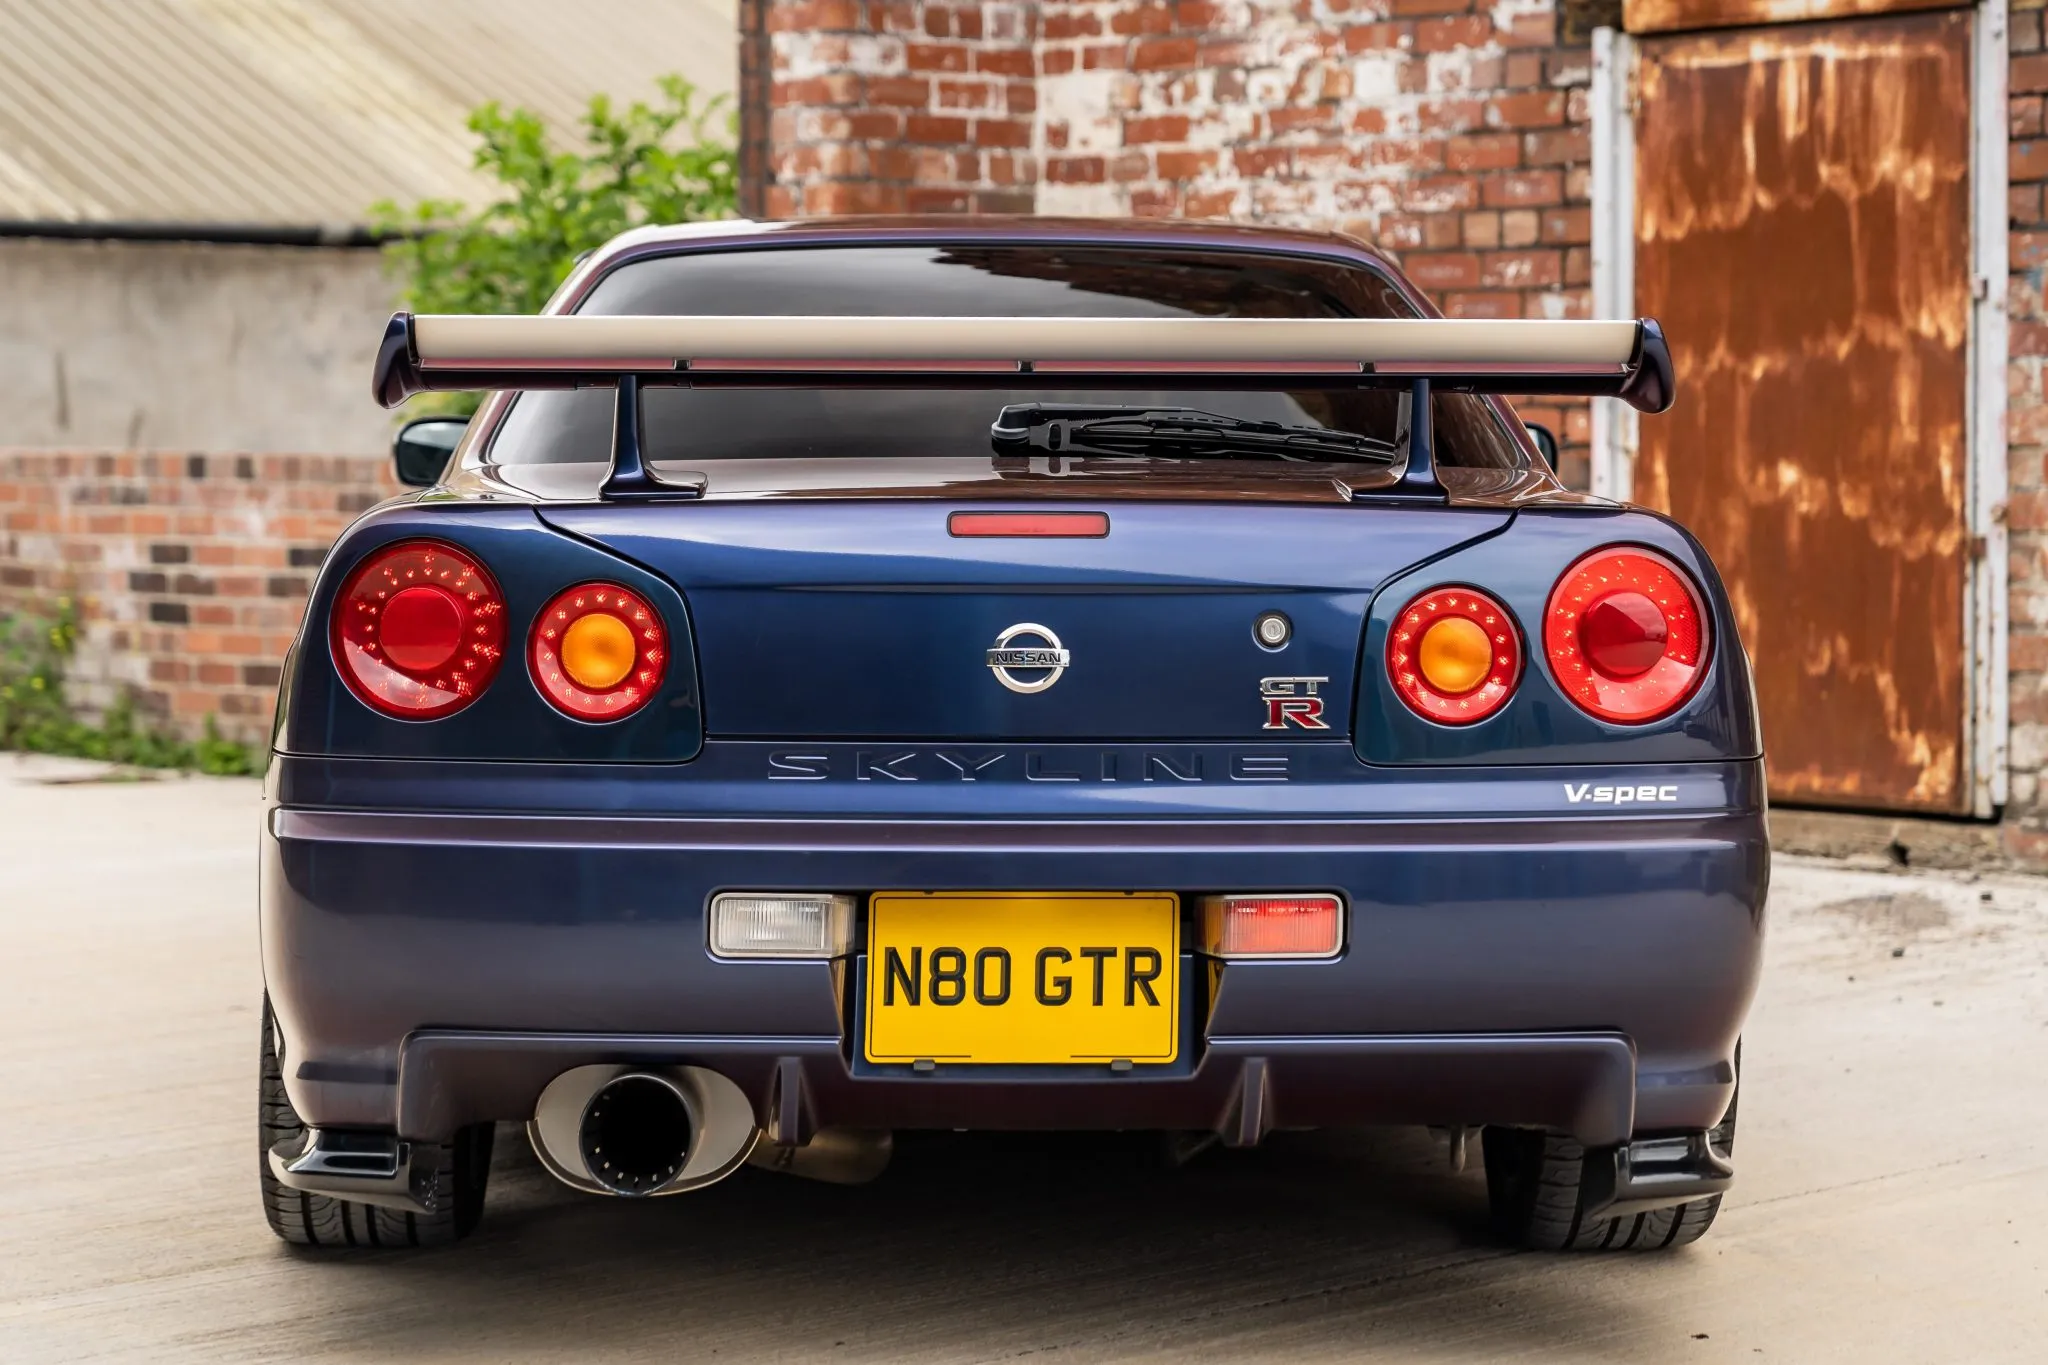 1999 Nissan Skyline GT-R R34 sets new auction record - Drive